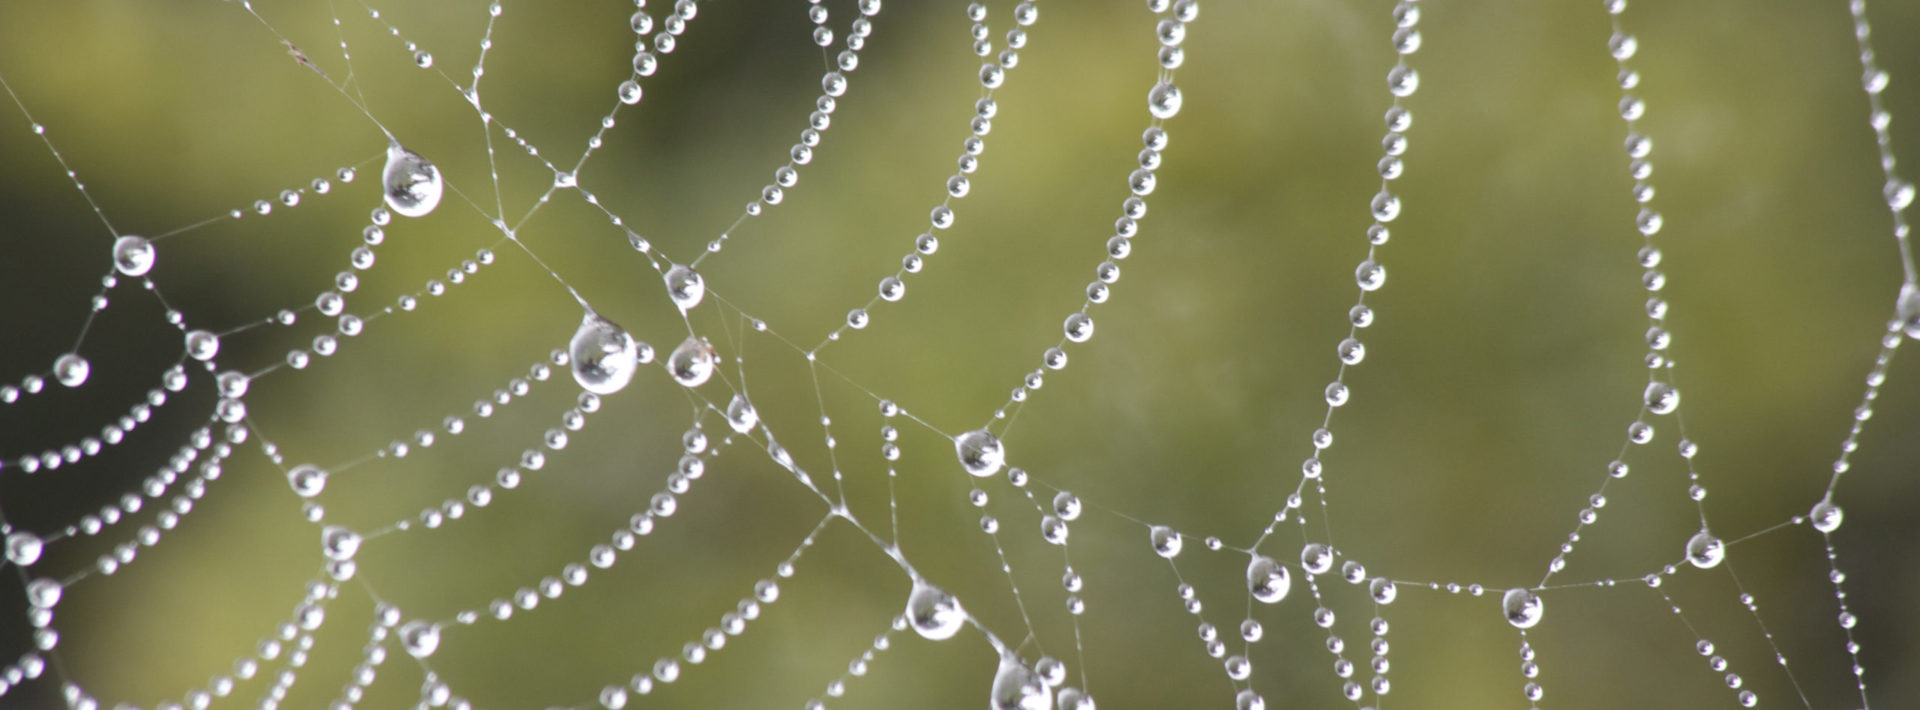 Research from Professor Markus Buehler and Laboratory for Atomistic and Molecular Mechanics shows spider silk can help understand how bones regenerate